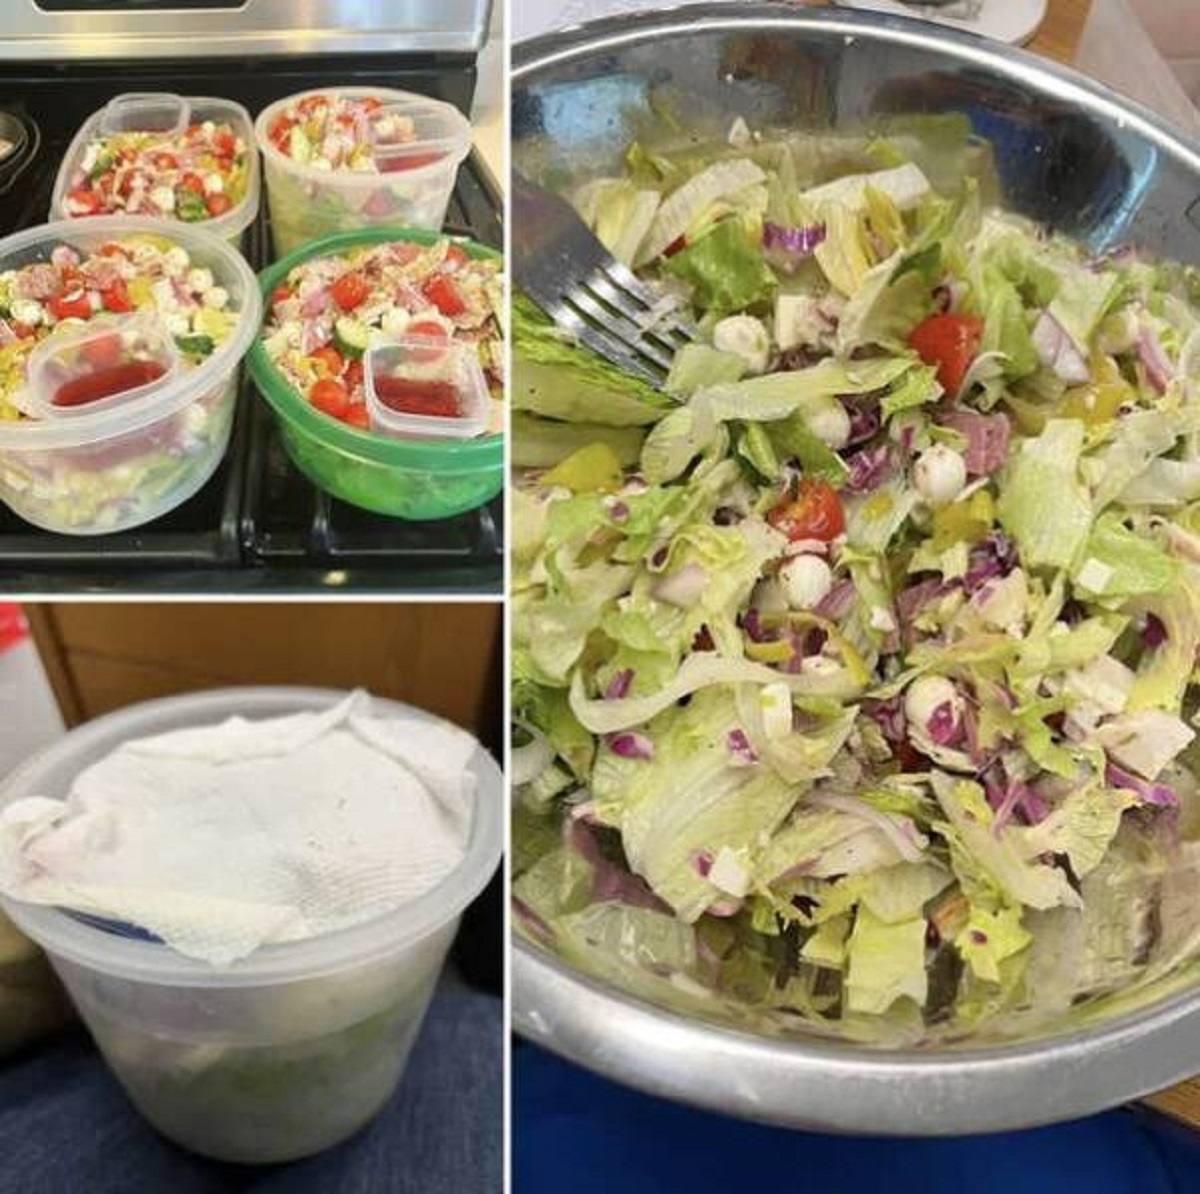 "If you want to keep a salad fresh days after making it, put a paper towel on top of it, right under the lid. It'll absorb moisture. The picture on the right is on day four."